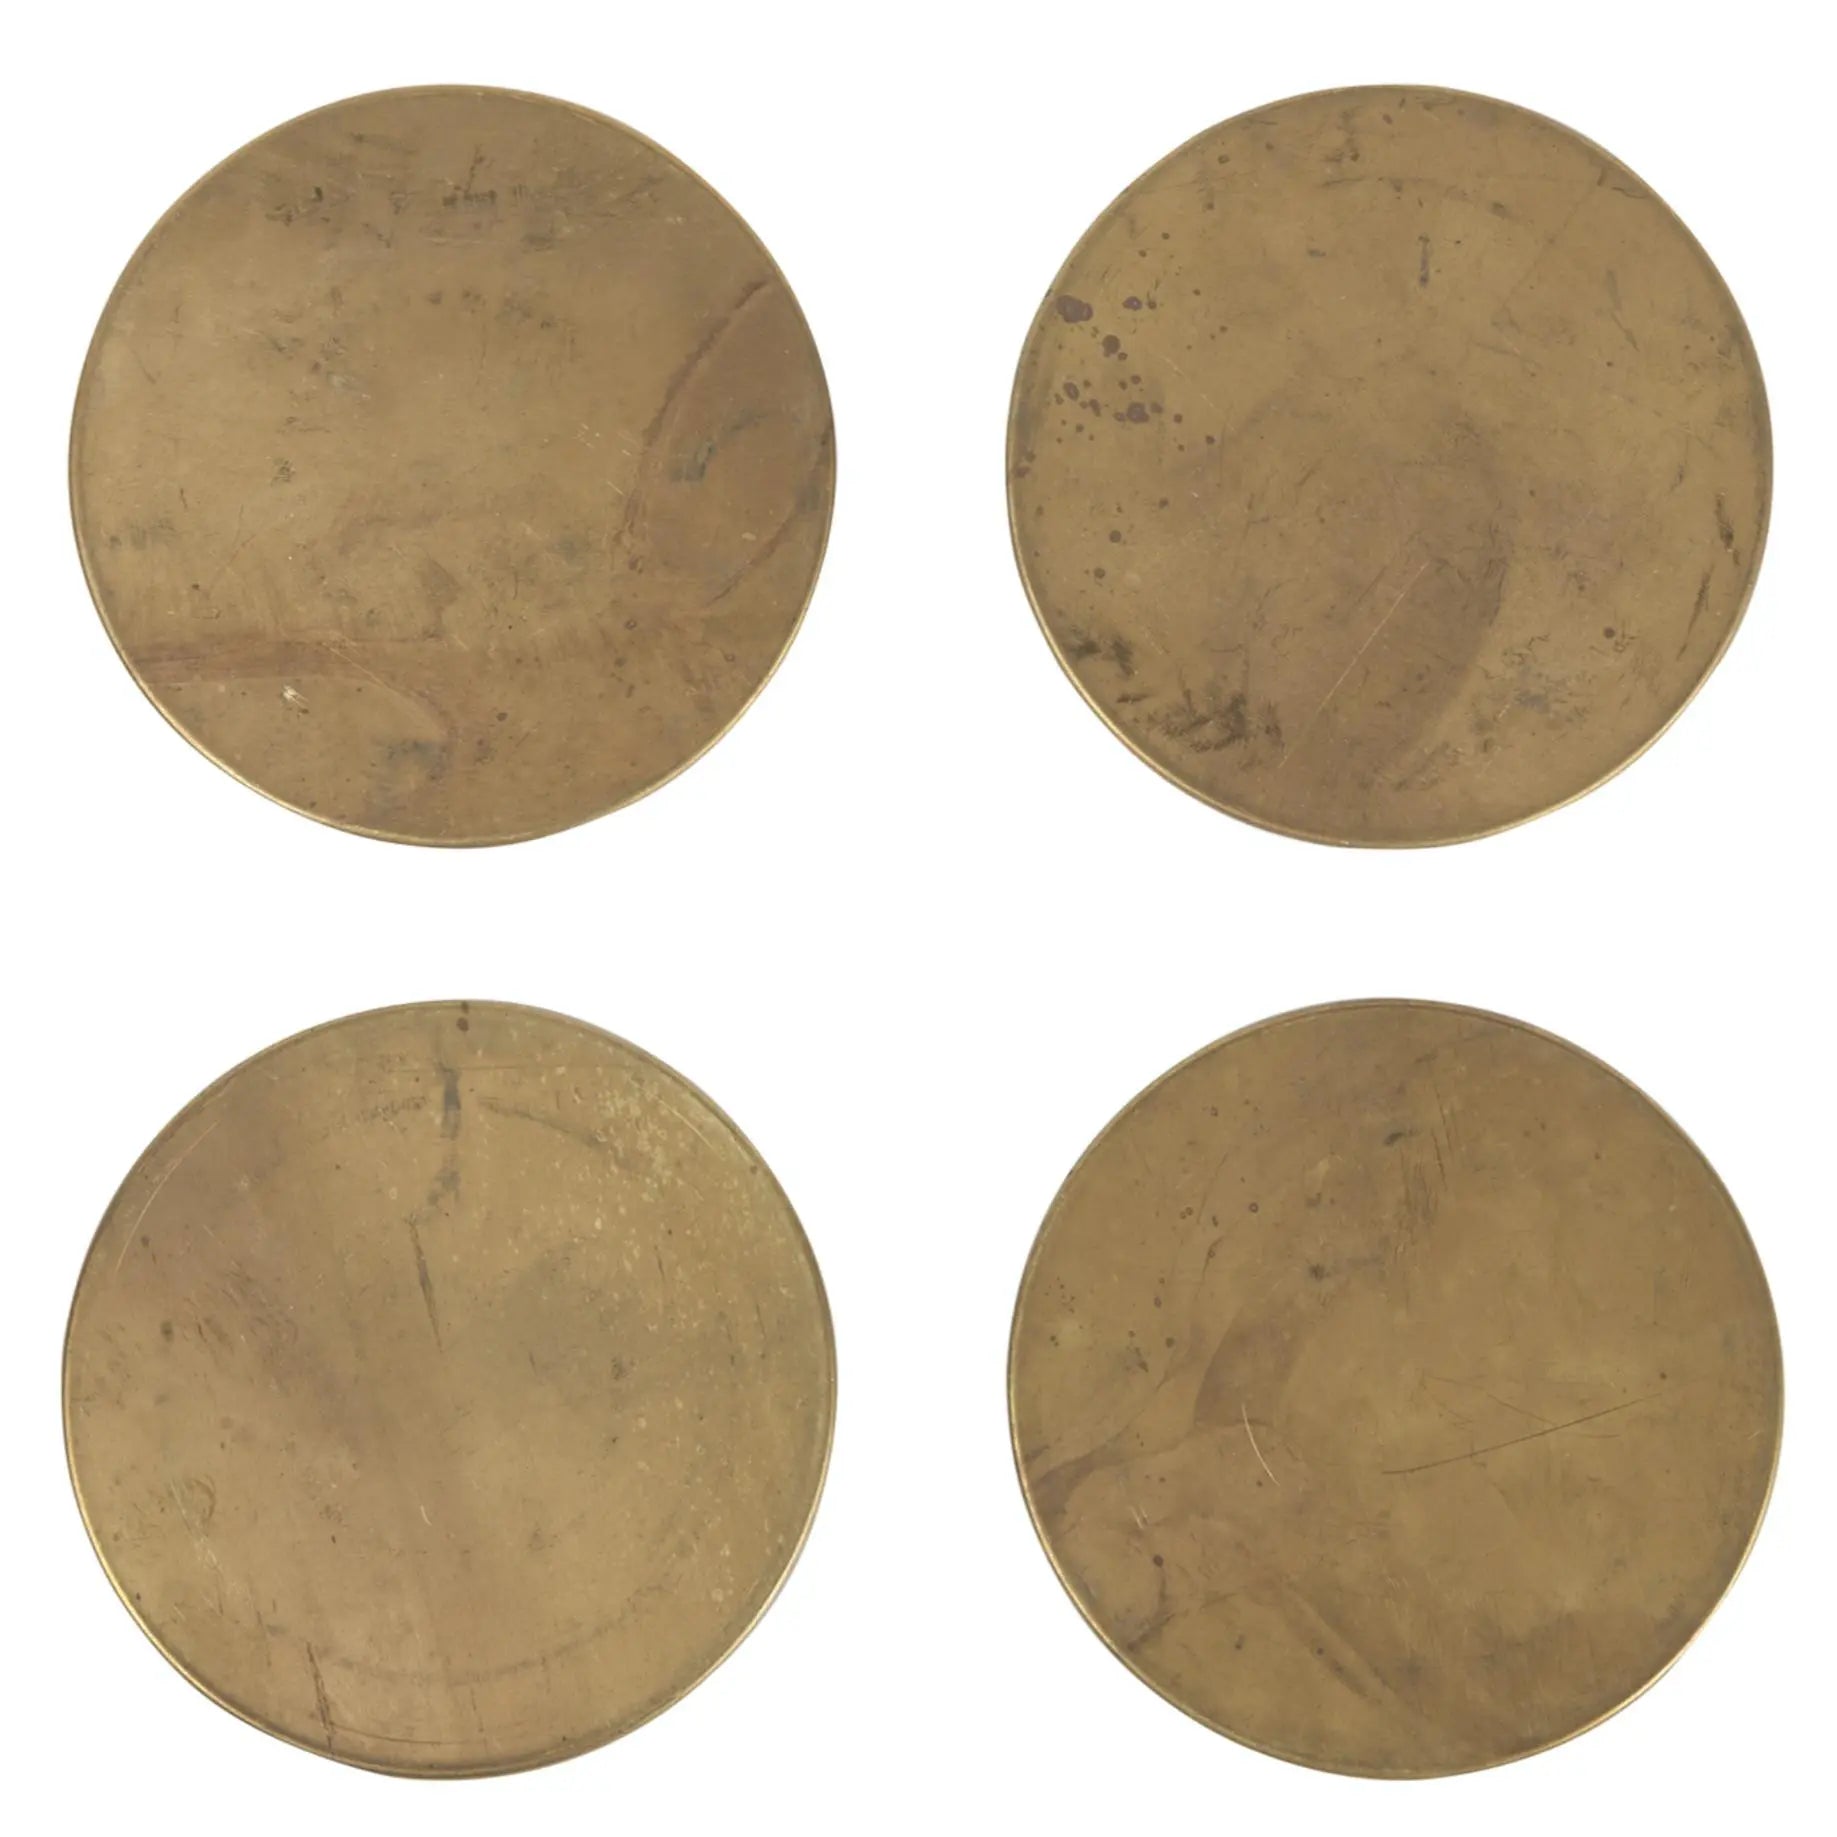 Coasters in Solid Brass, Copper or Nickel